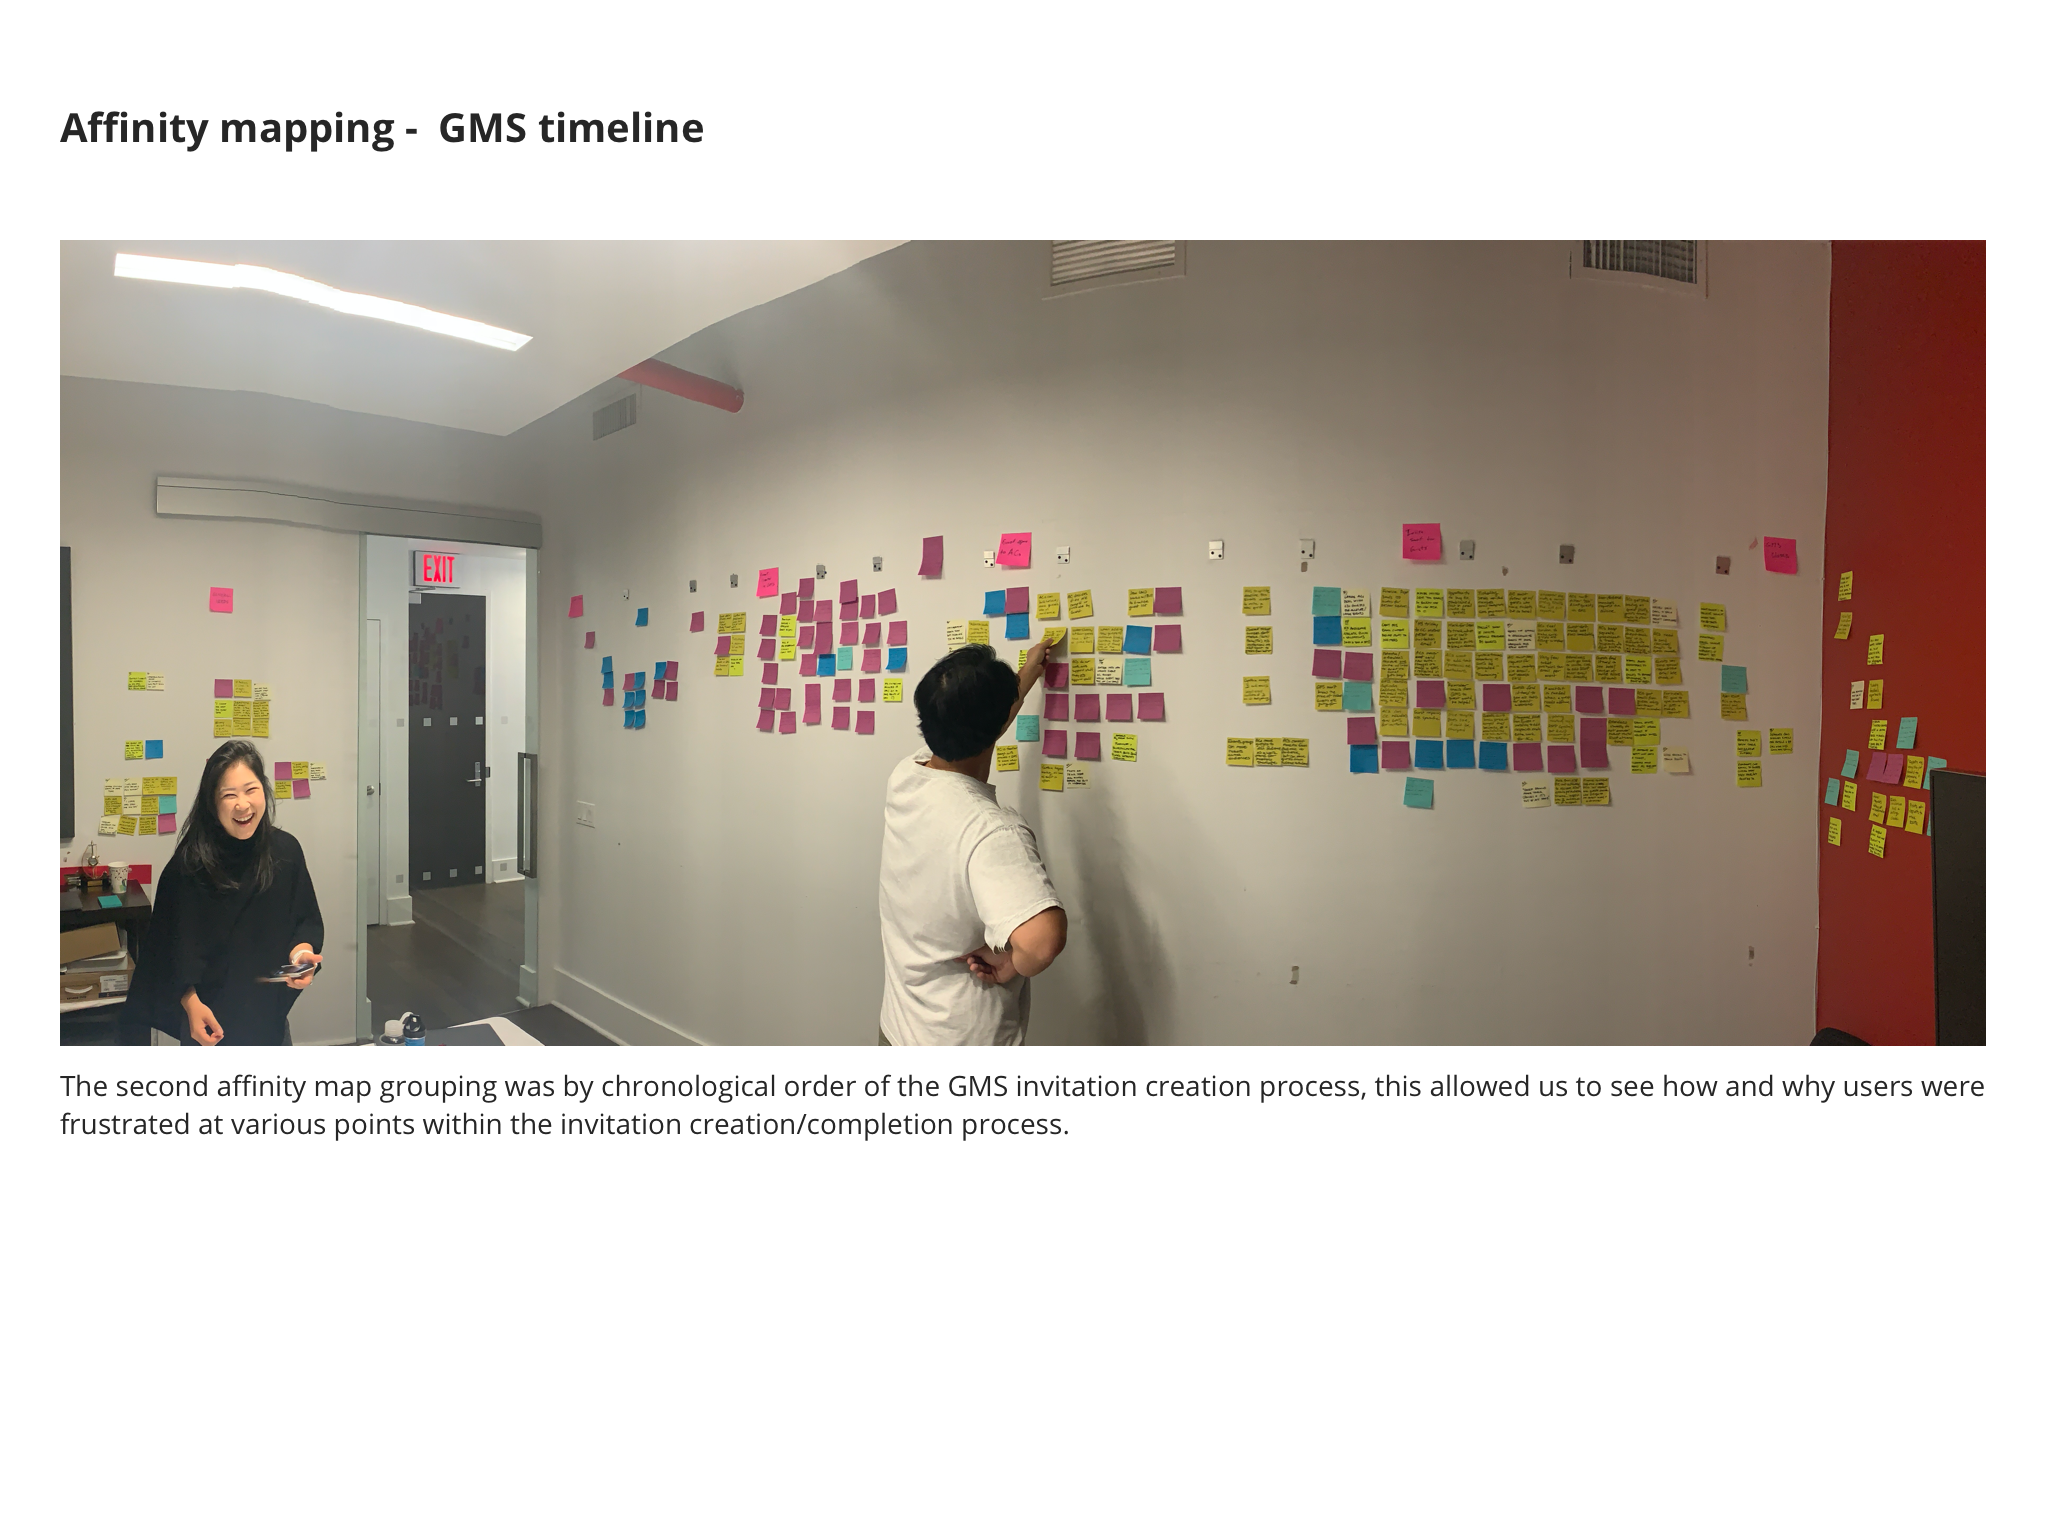  The second affinity map grouping was by chronological order of the GMS invitation creation process, this allowed us to see how and why users were frustrated at various points within the invitation creation/completion process. 